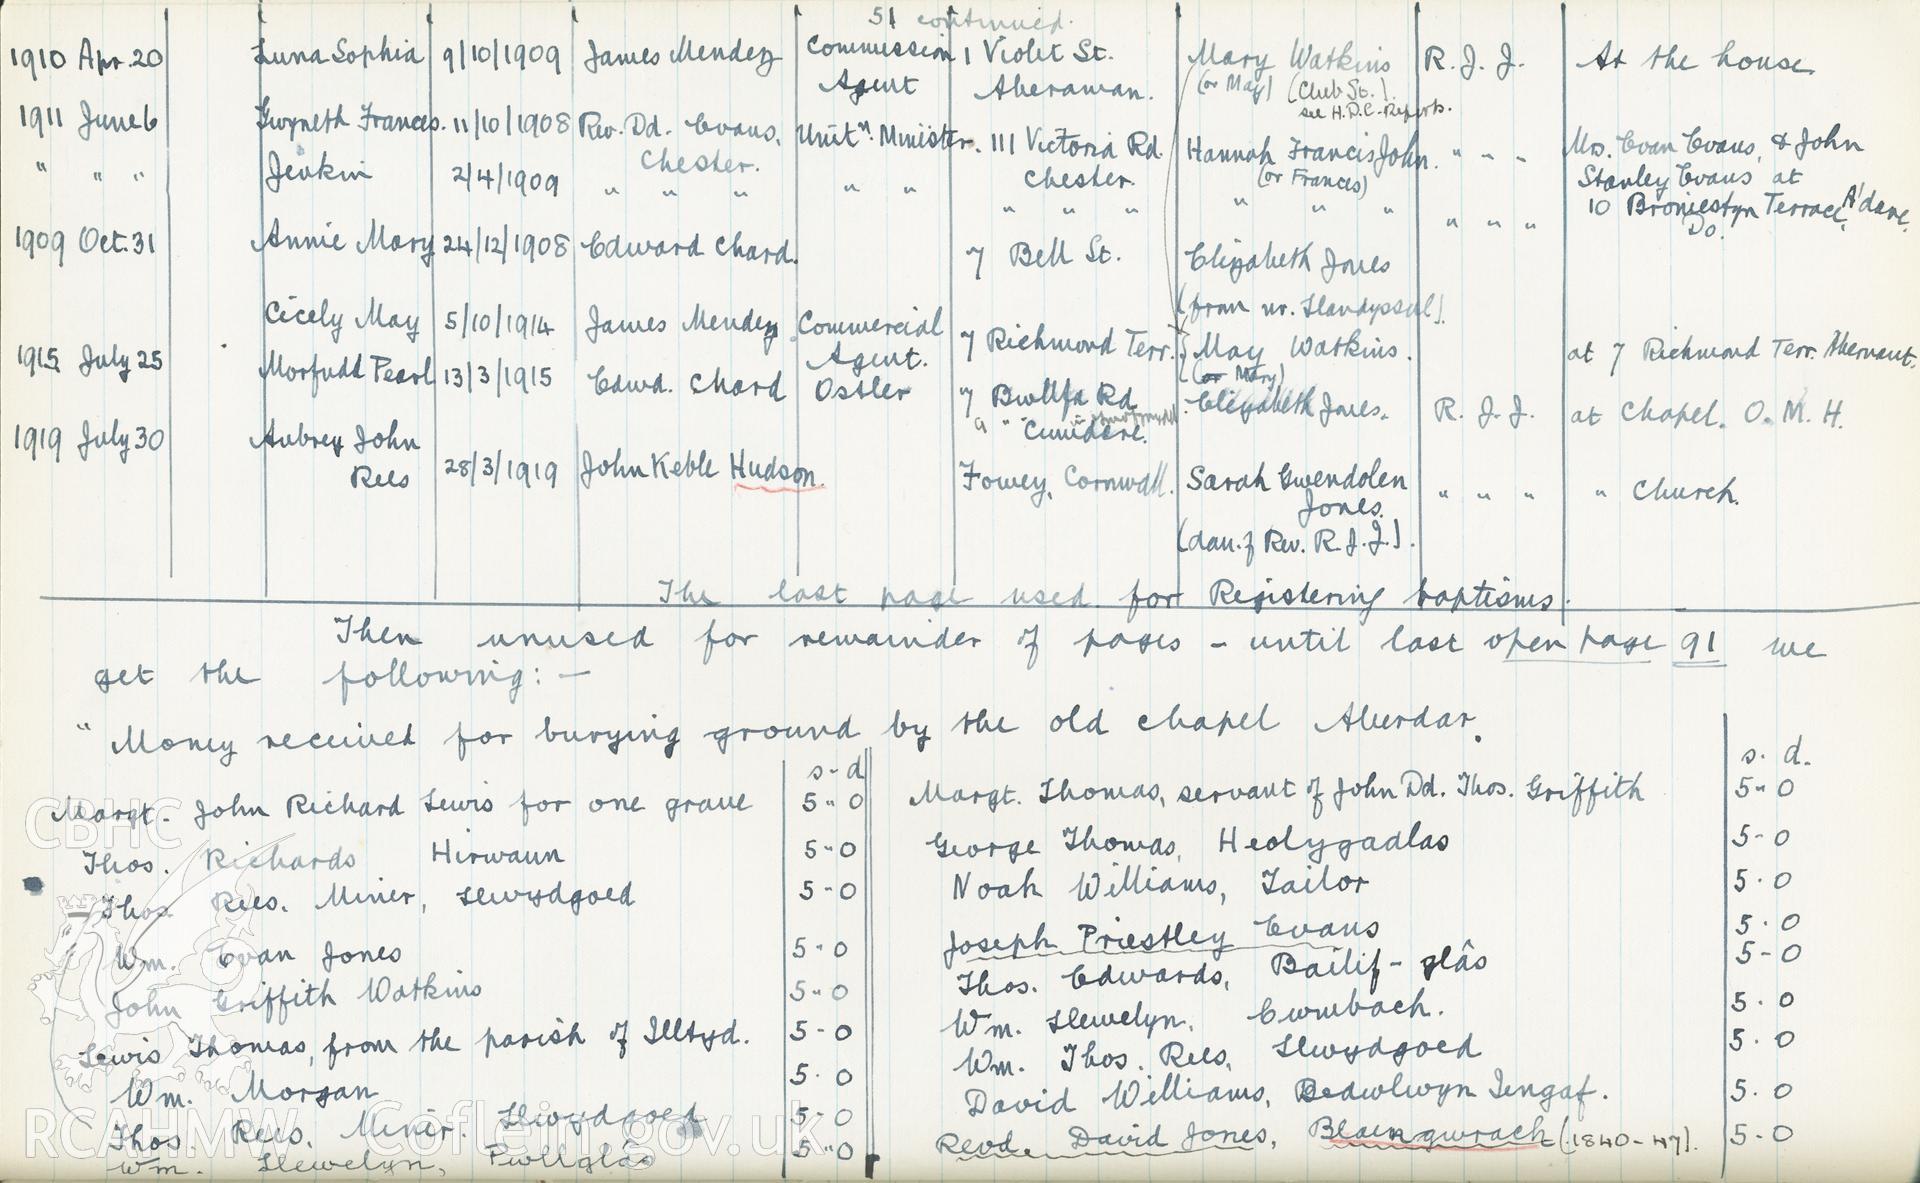 "Baptism Registered" book for Hen Dy Cwrdd, made between April 19th and 28th, 1941, by W. W. Price. Page listing baptisms from 20th April 1910 to 30th July 1919, plus list of people who'd payed for burying ground. Donated to the RCAHMW as part of the Digital Dissent Project.